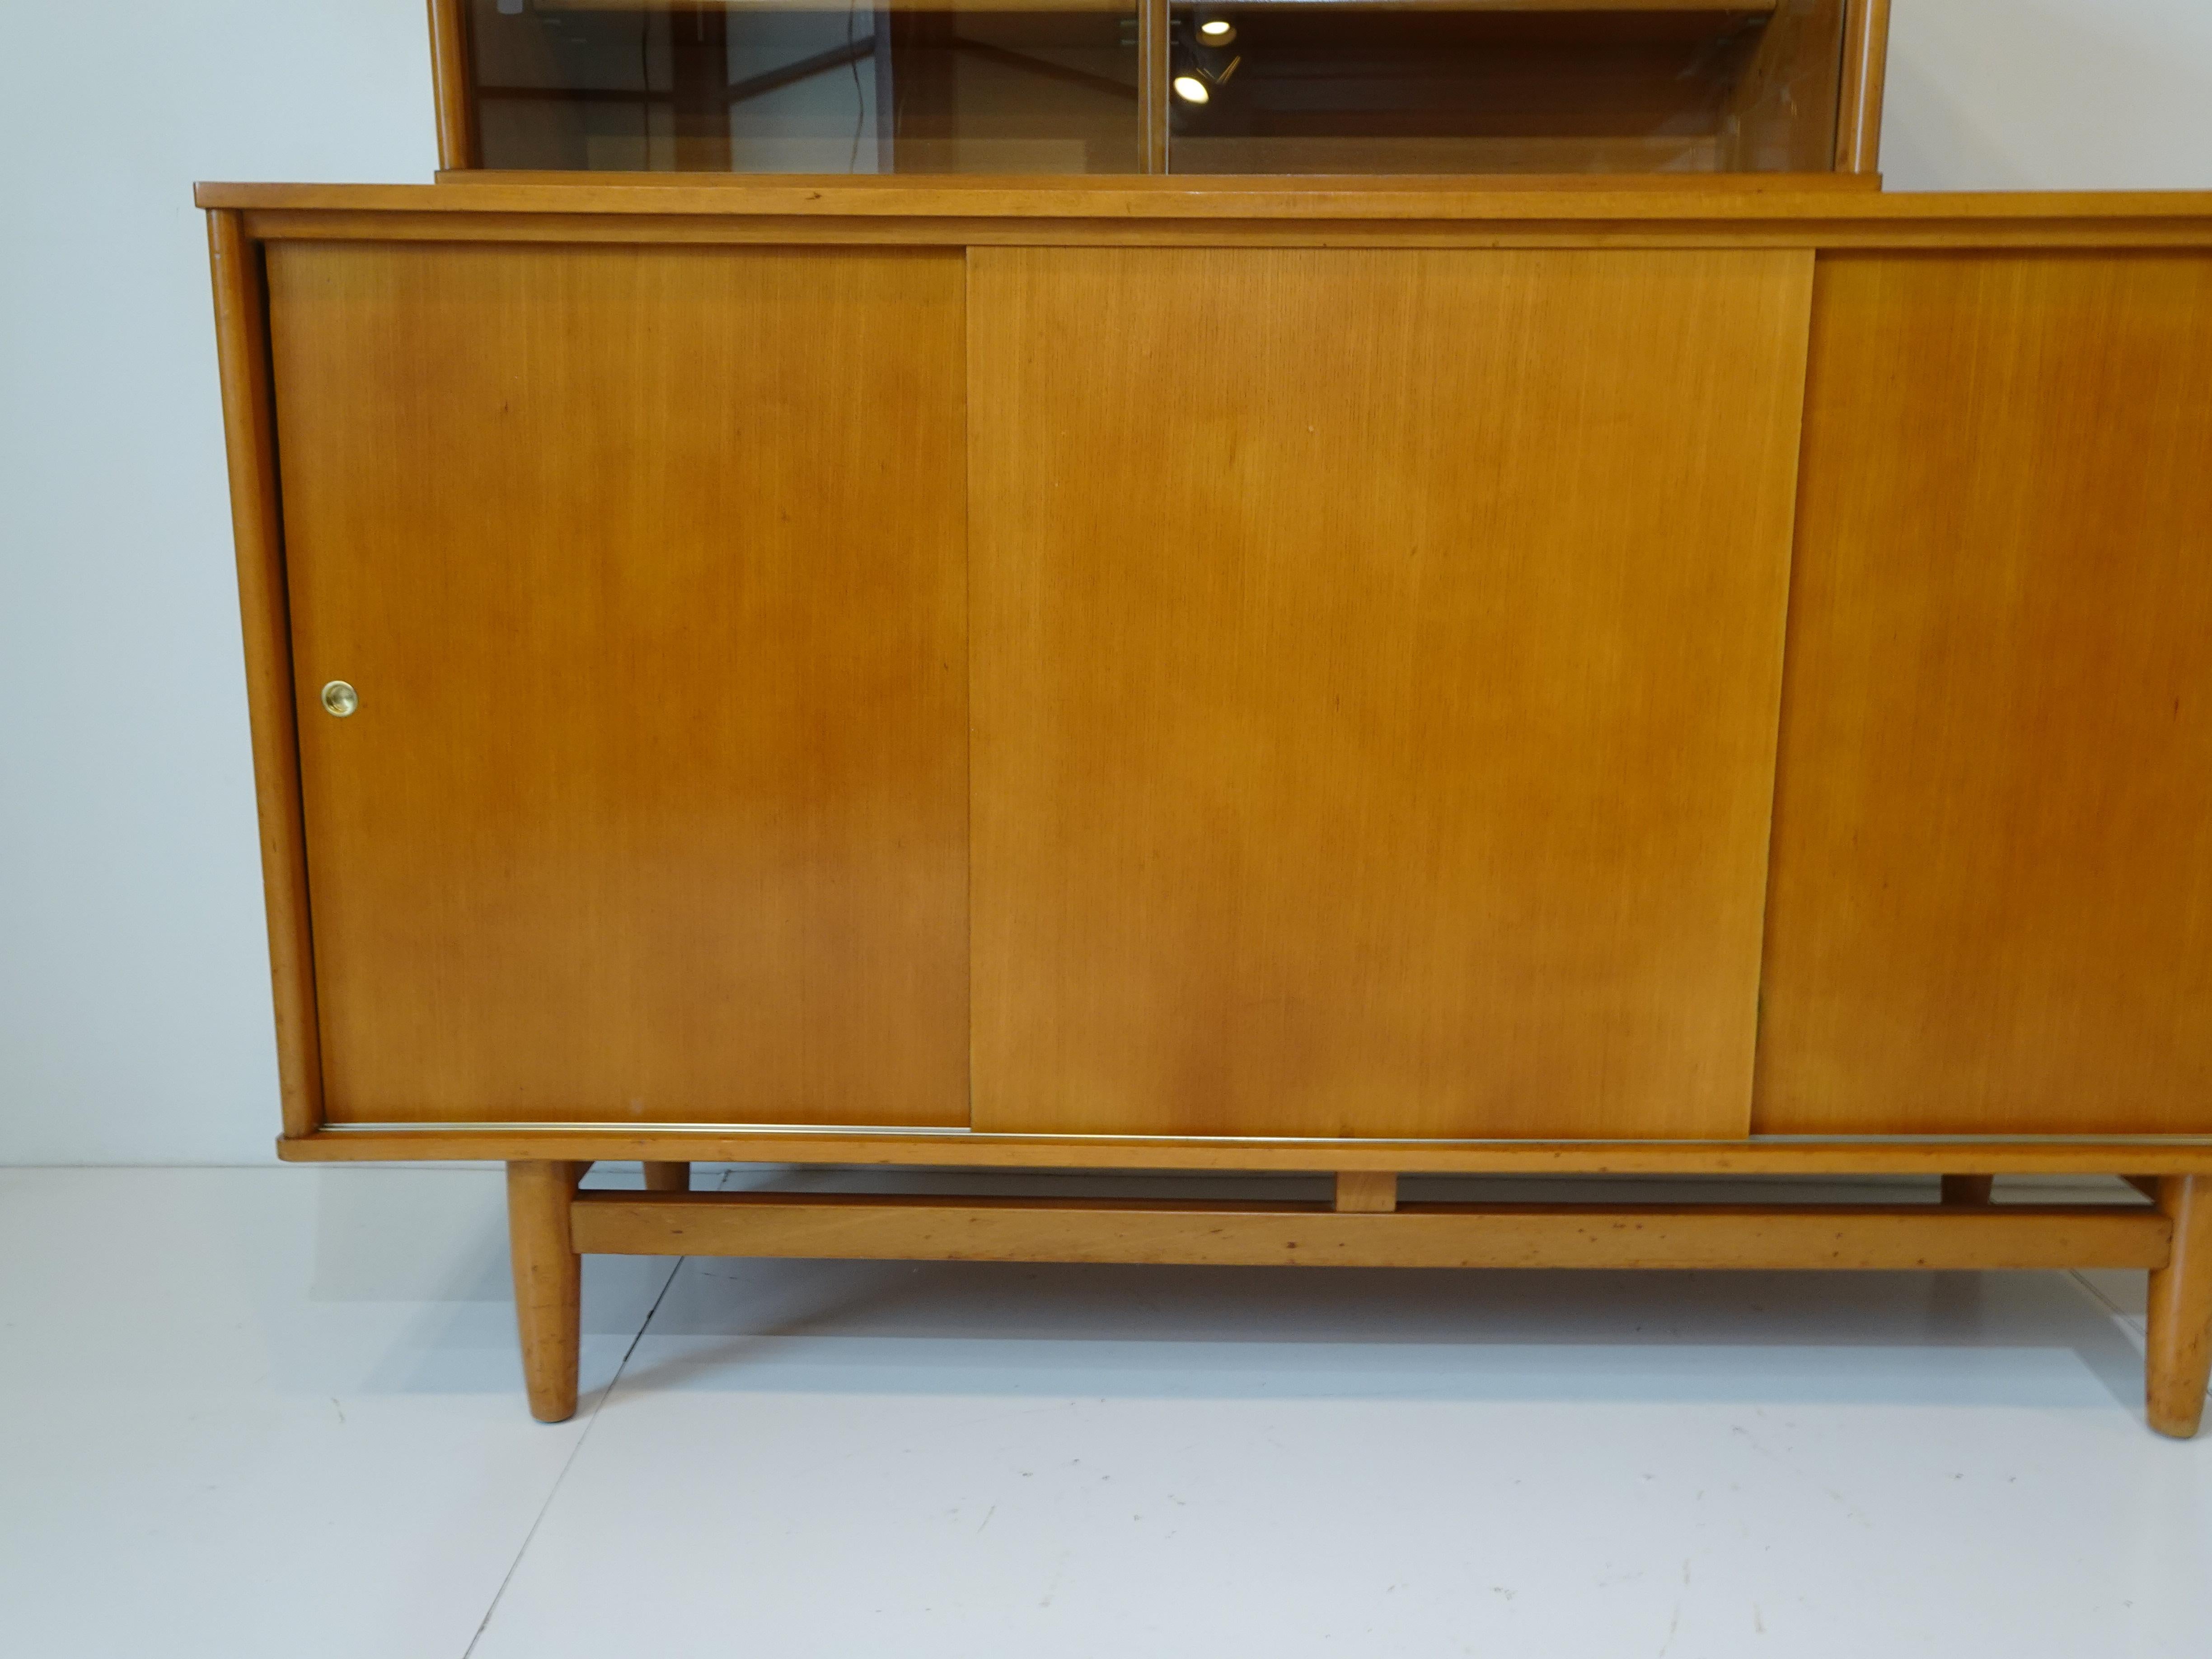 20th Century Early Milo Baughman Credenza / Sideboard for Drexel Todays Living